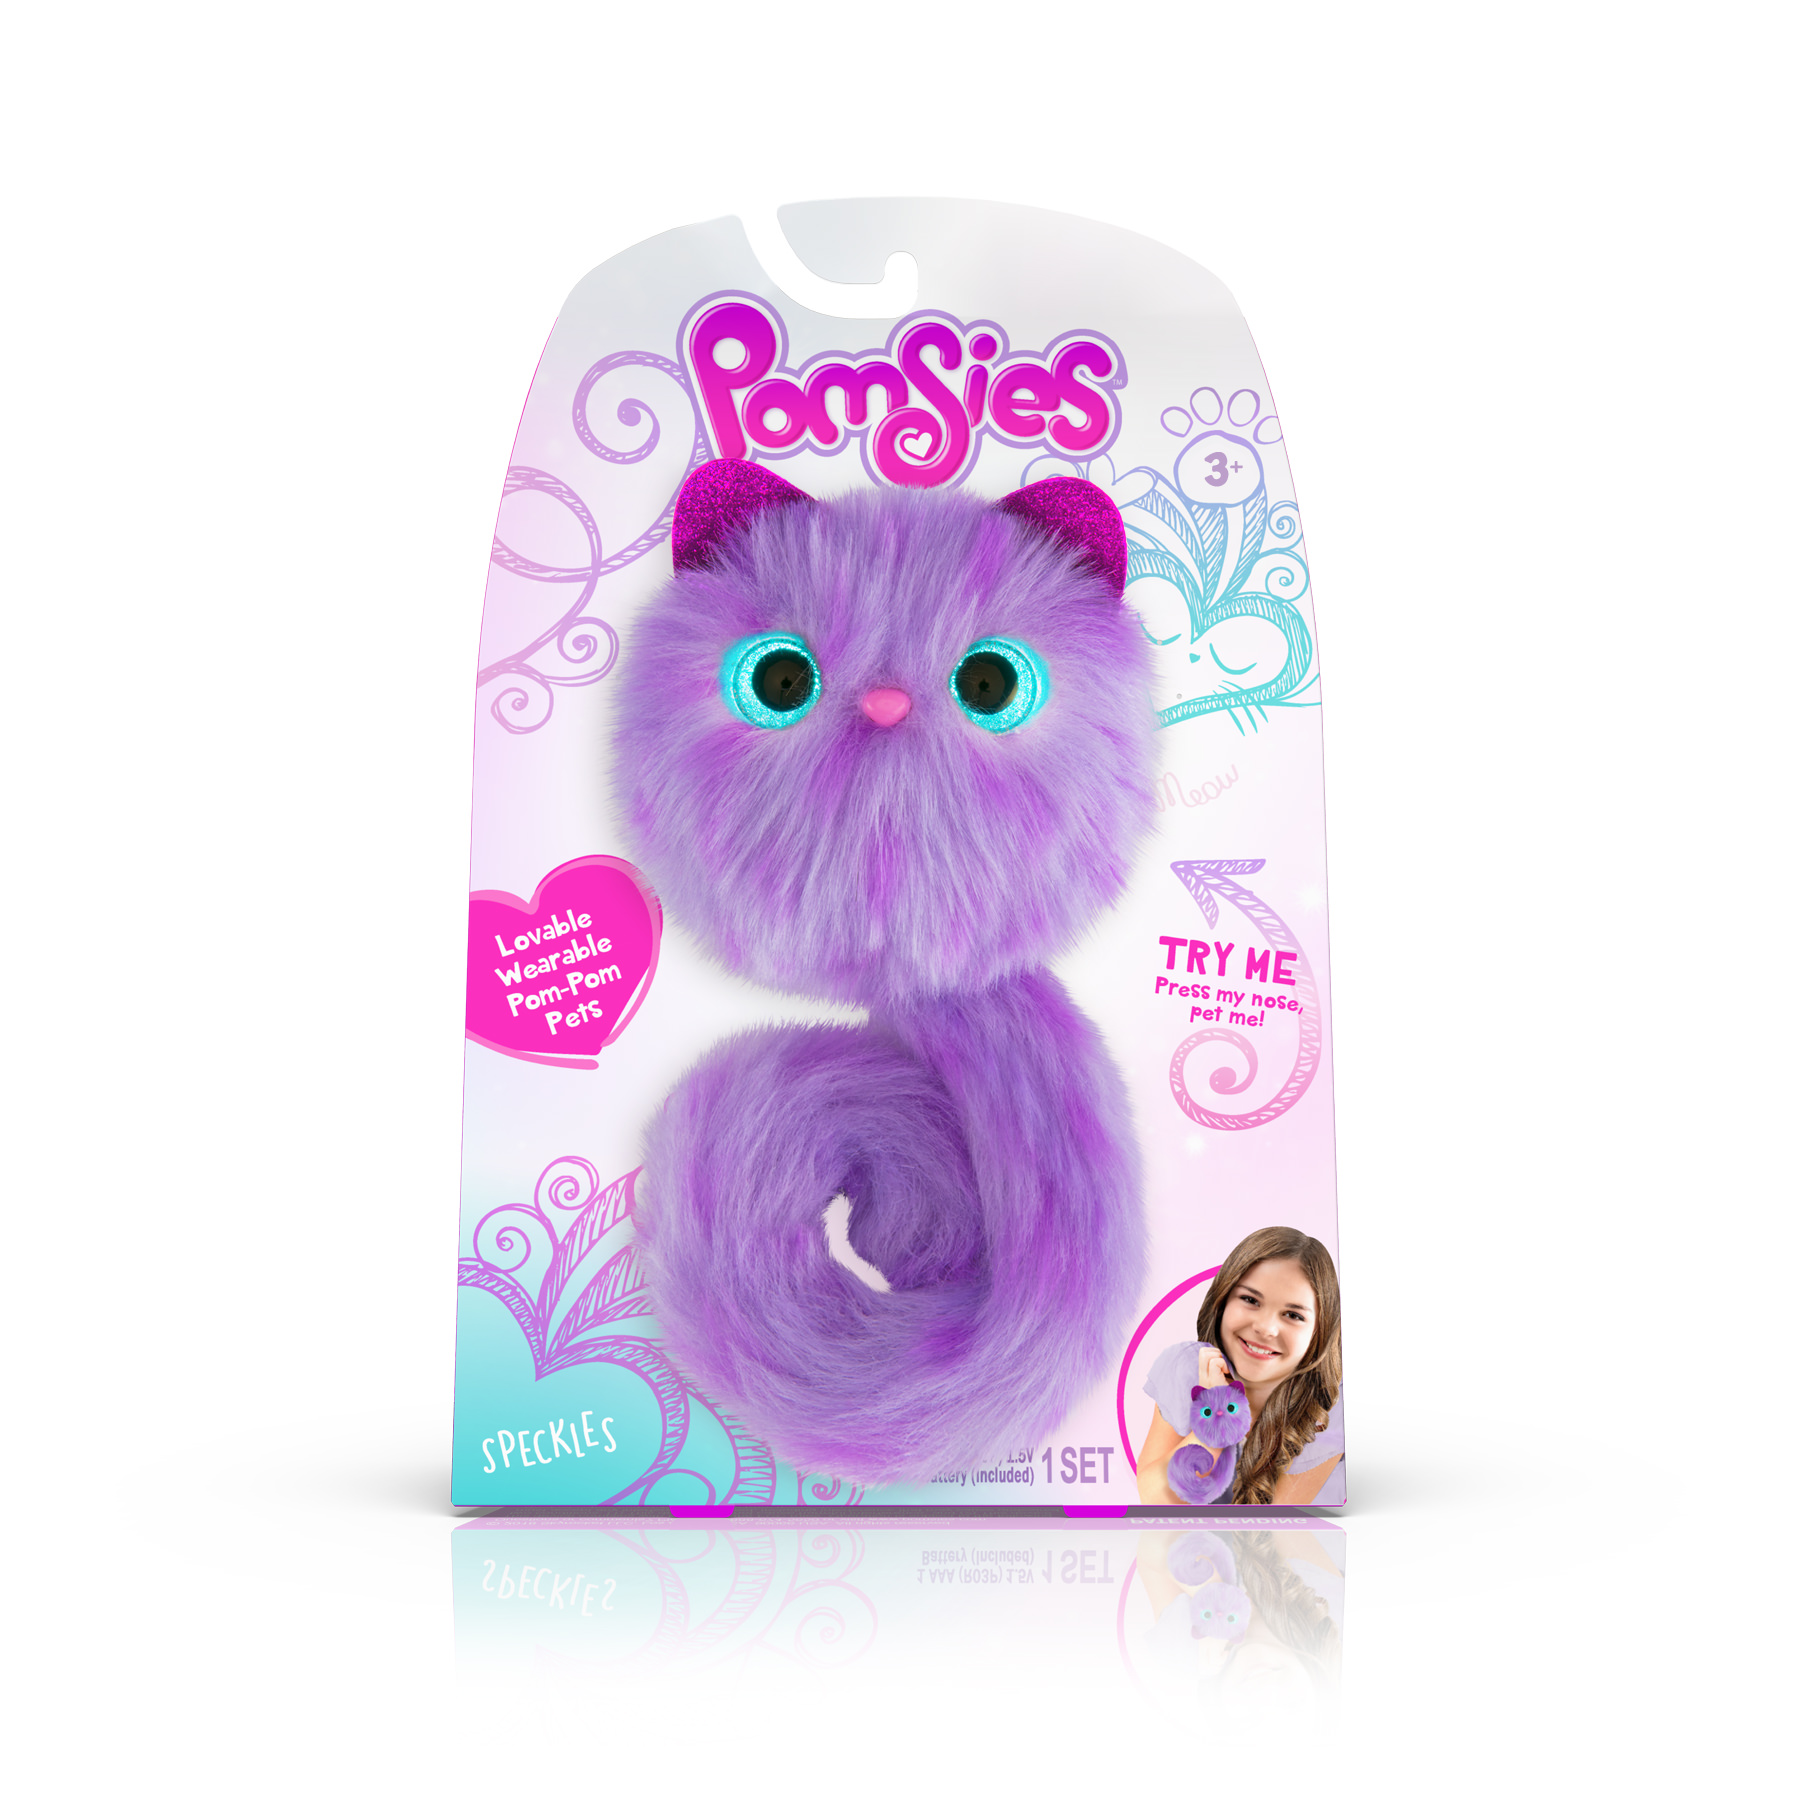 Pomsies Pet Speckles- Plush Interactive Toy - image 1 of 4